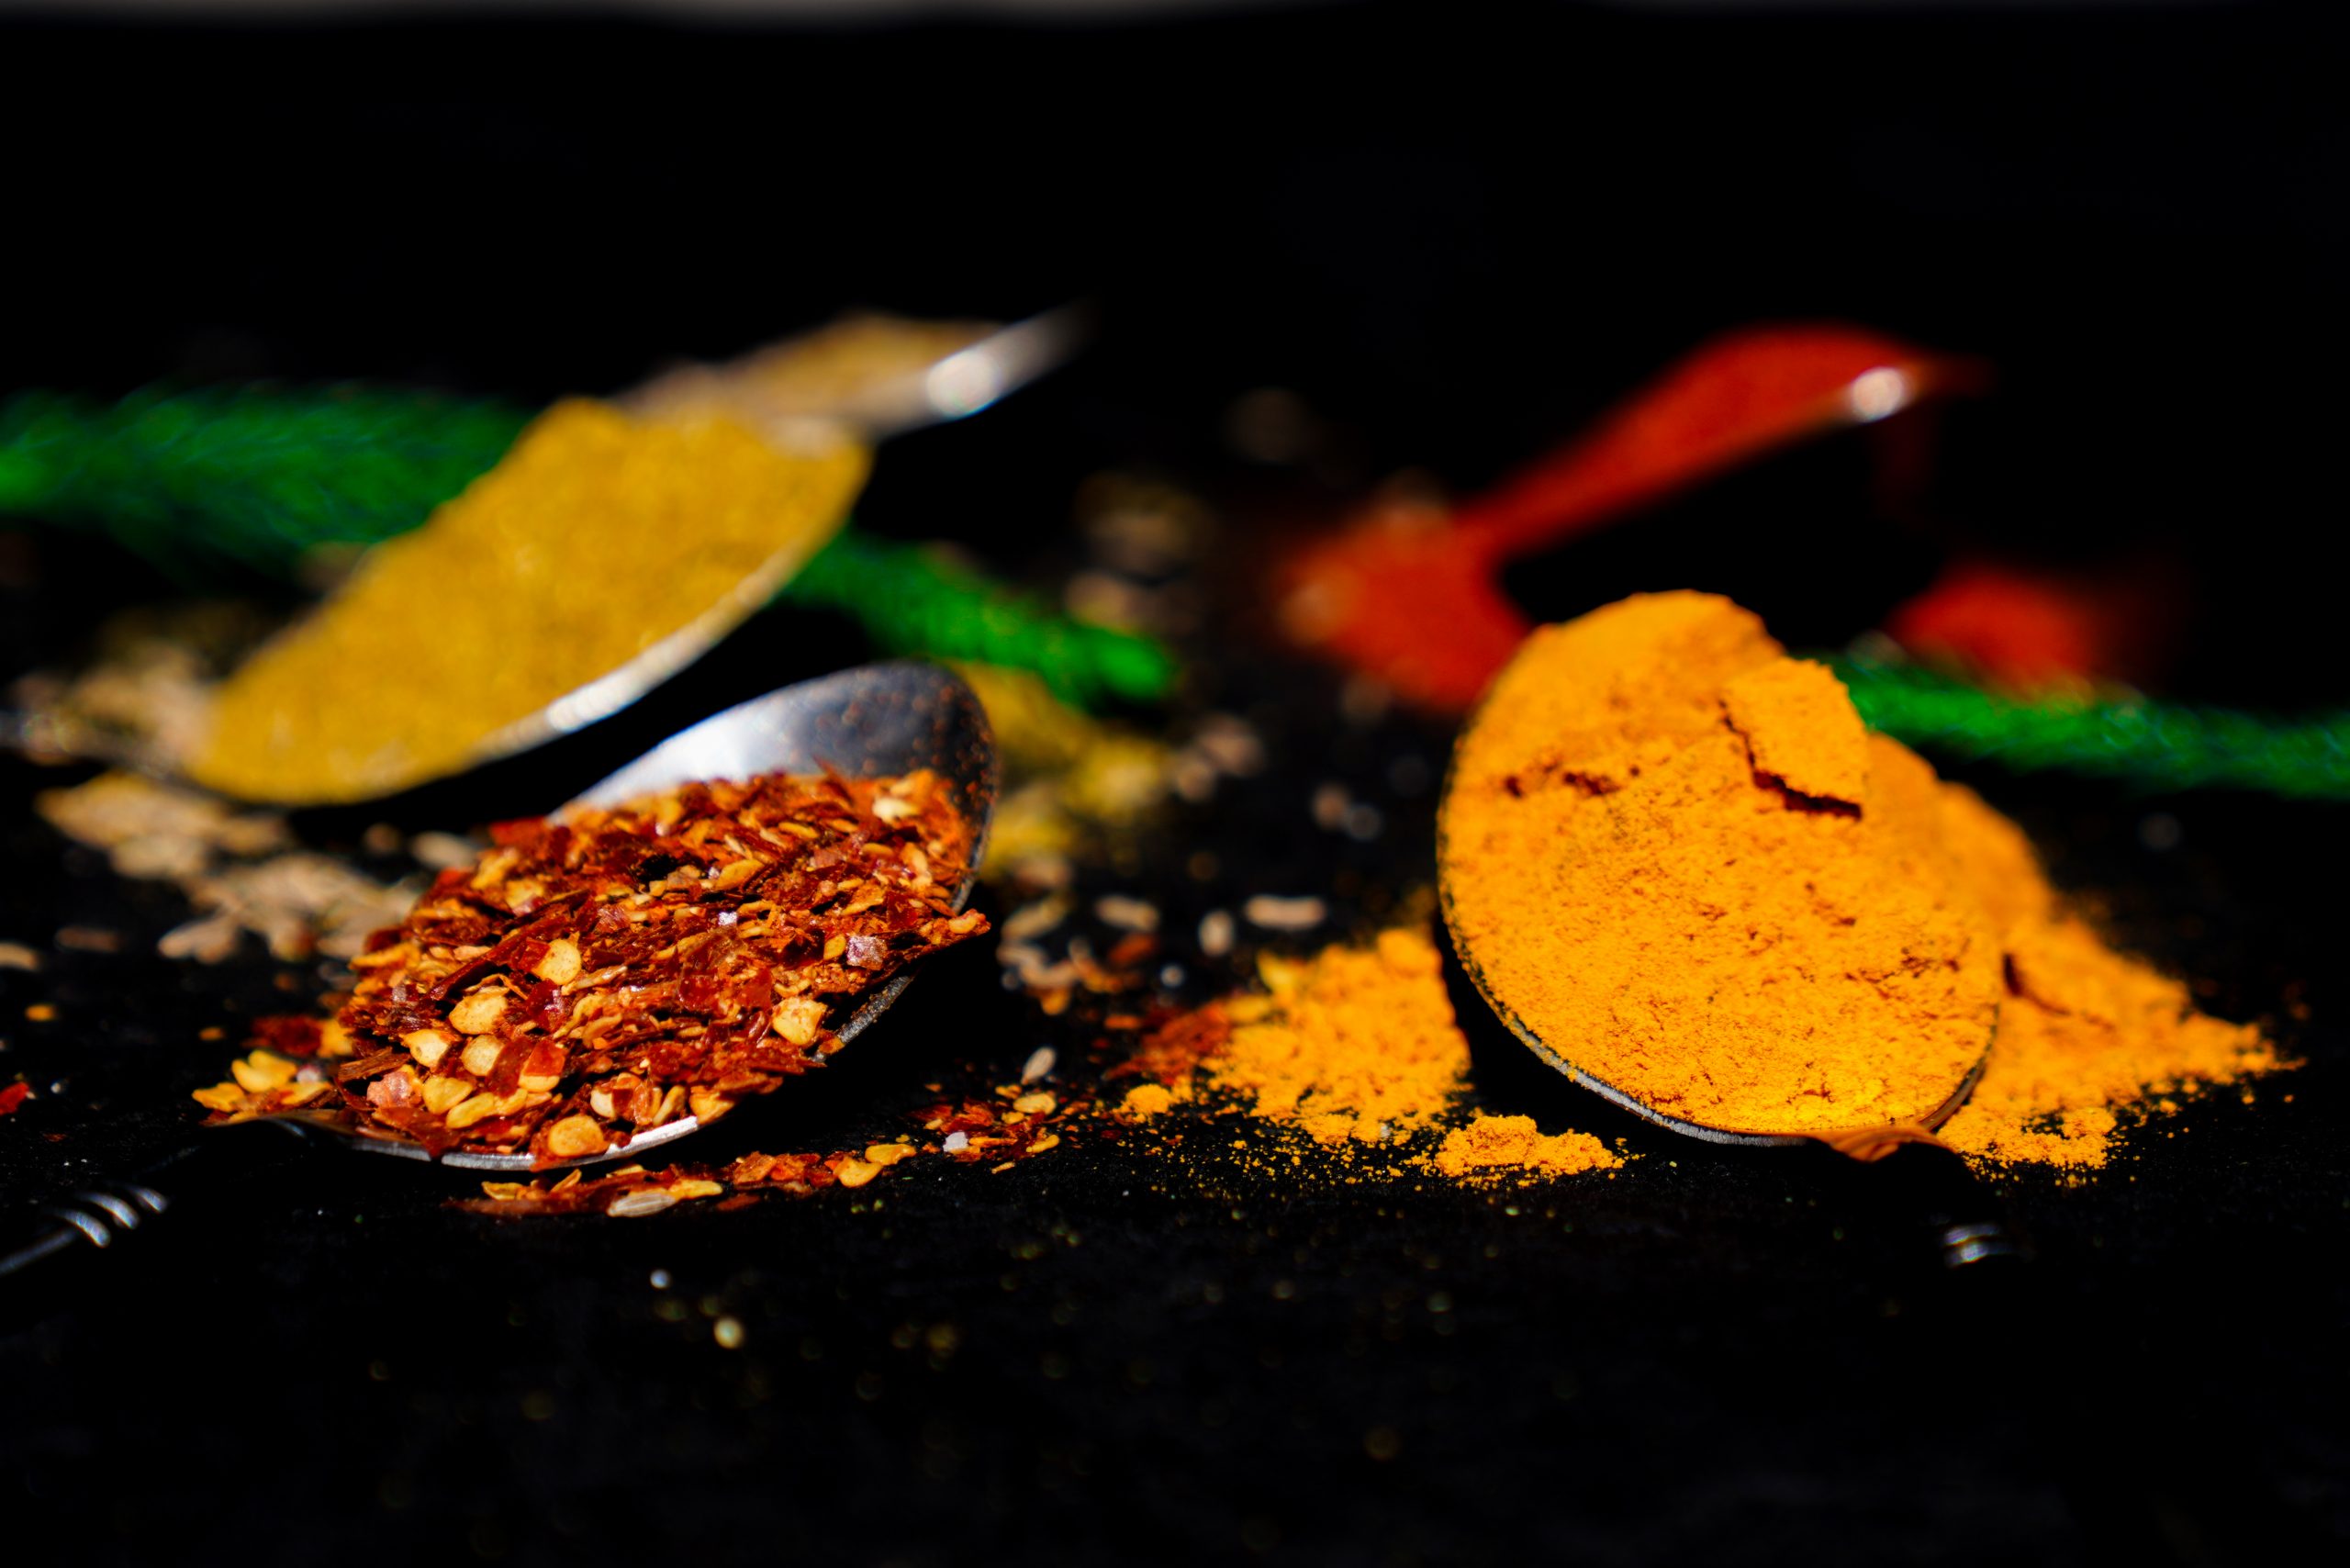 Indian spices in spoons